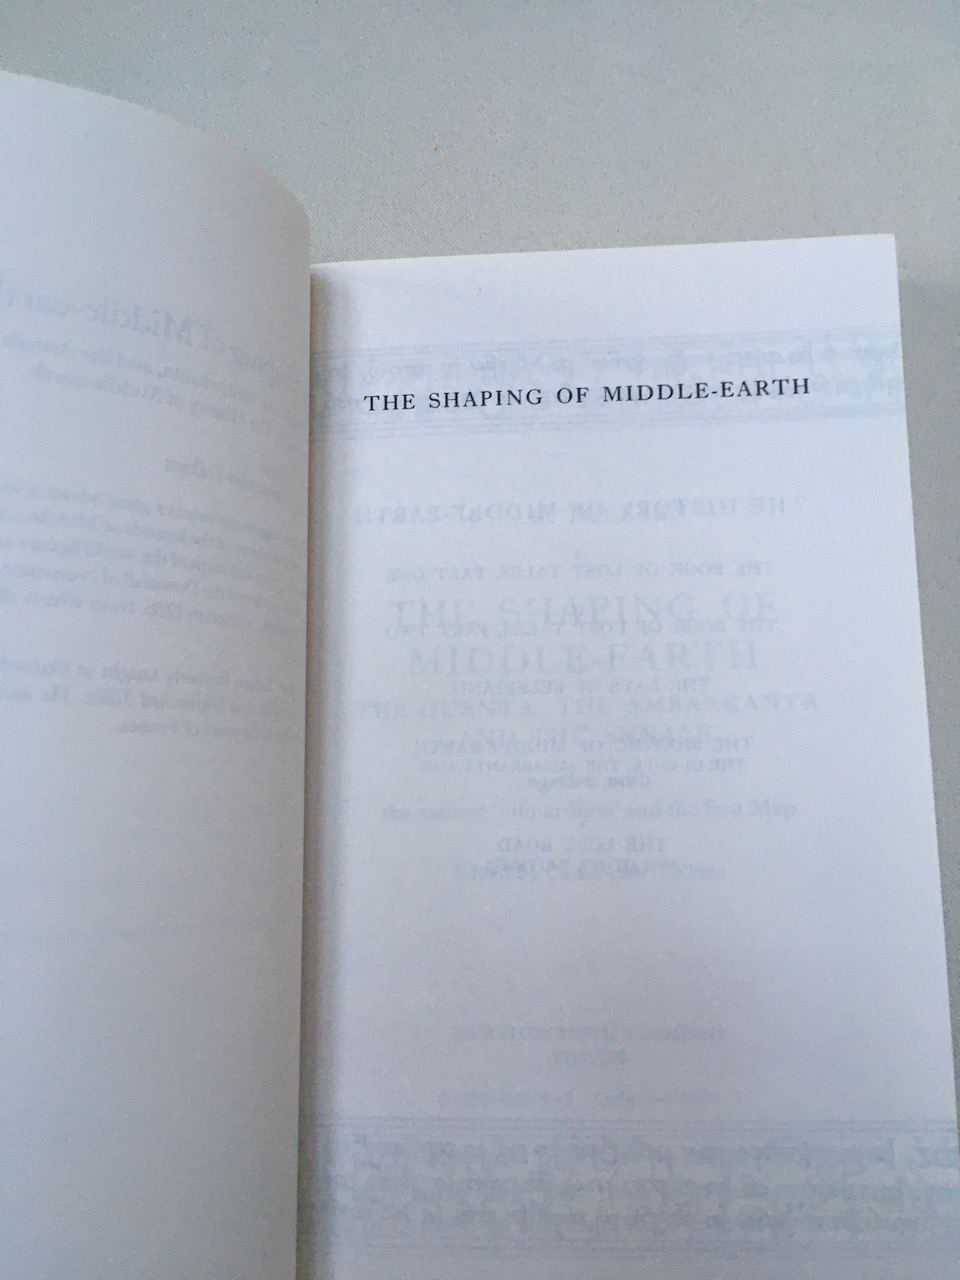 The Shaping of Middle-earth Uncorrected Proof US 1986 9